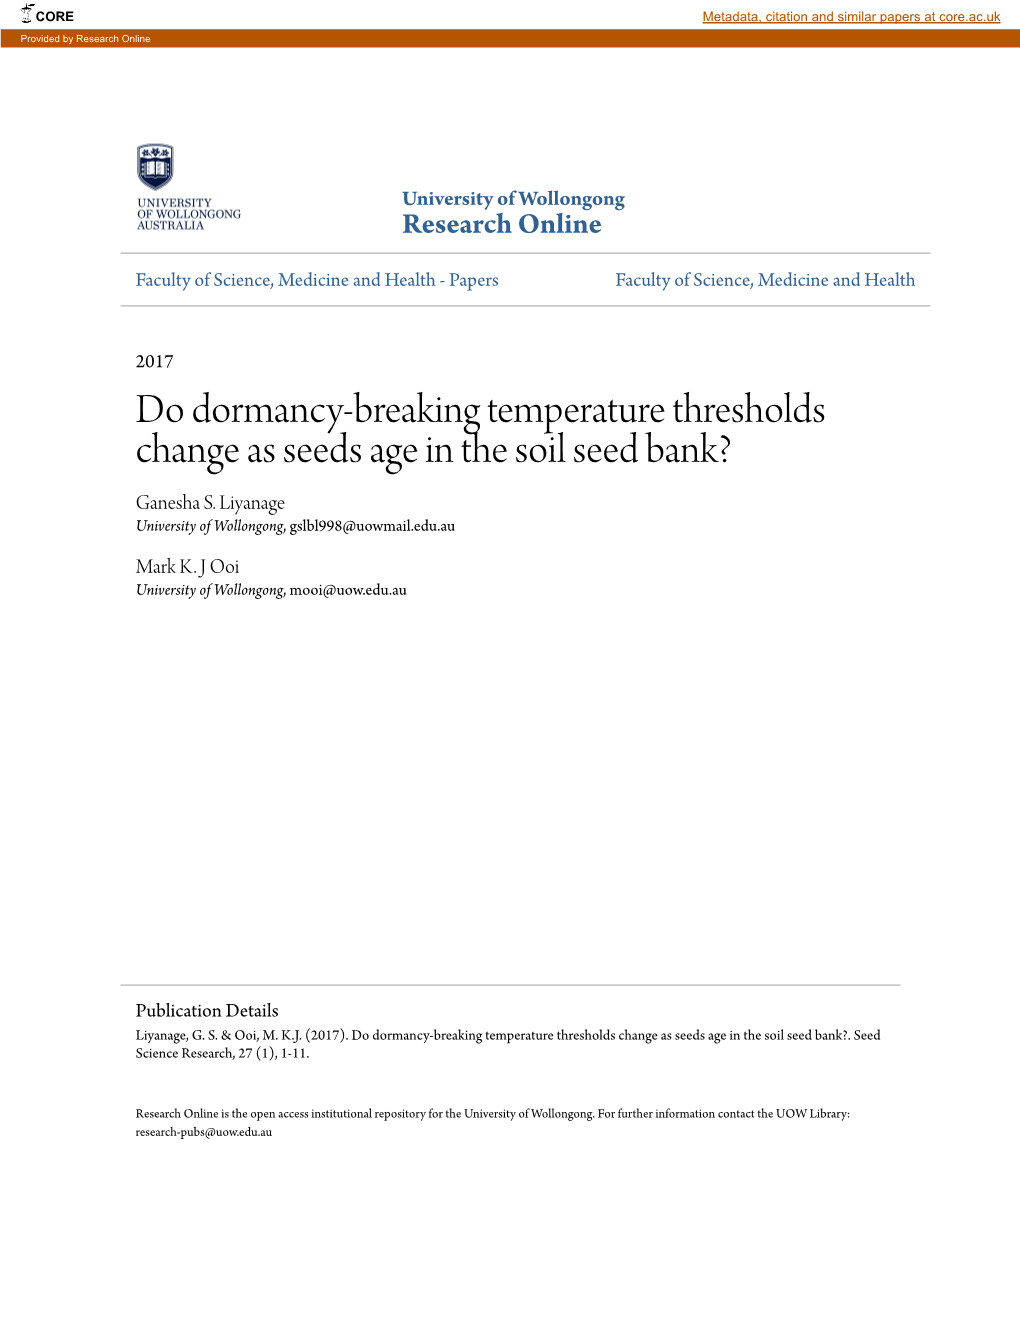 Do Dormancy-Breaking Temperature Thresholds Change As Seeds Age in the Soil Seed Bank? Ganesha S